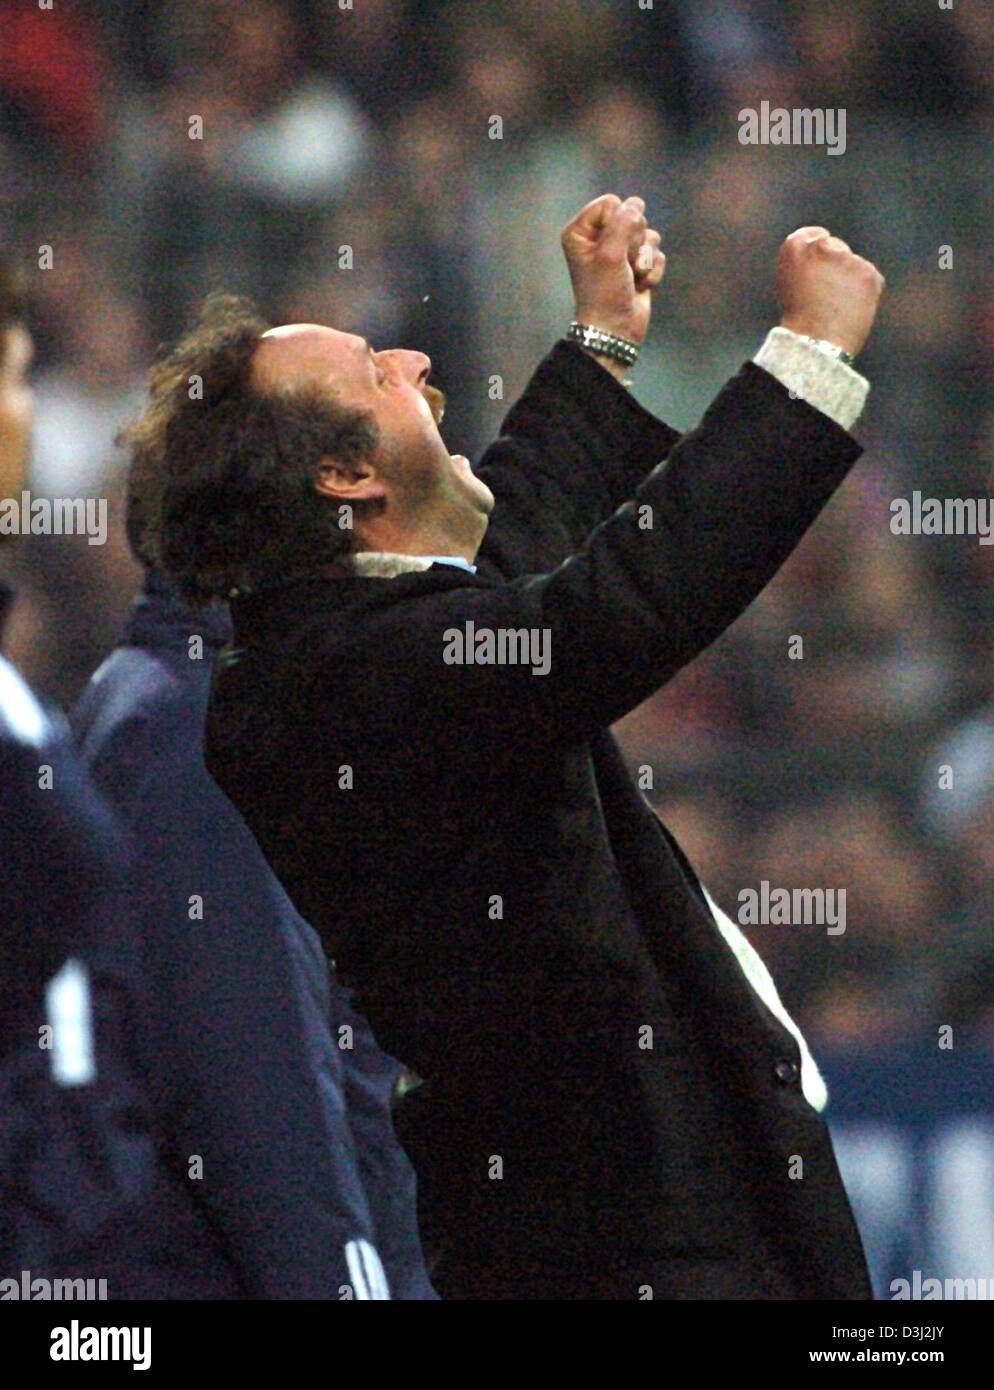 VfL Bochum coach Peter Neururer jubilates the the end of the match after his team won 1:0 against FC Bayern Munich on 14 February 2004 at the Rheinstadion, Germany. Stock Photo